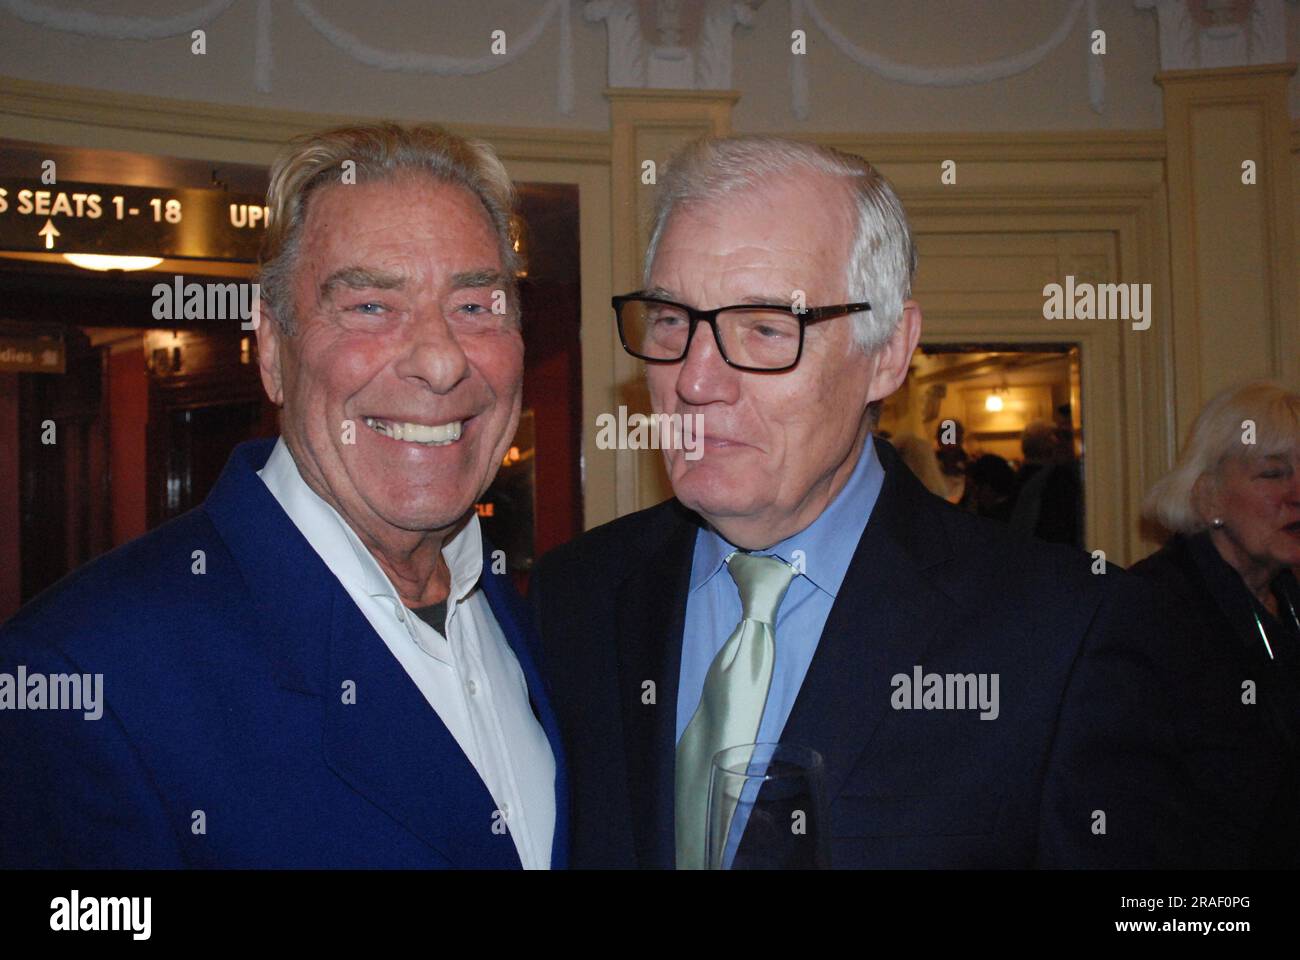 Doctor Who Dr Who actors, John Levene & Richard Franklin, at the unveiling of a Blue Plaque commemorating Jon Pertwee, New Wimbledon Theatre, 2016 Stock Photo